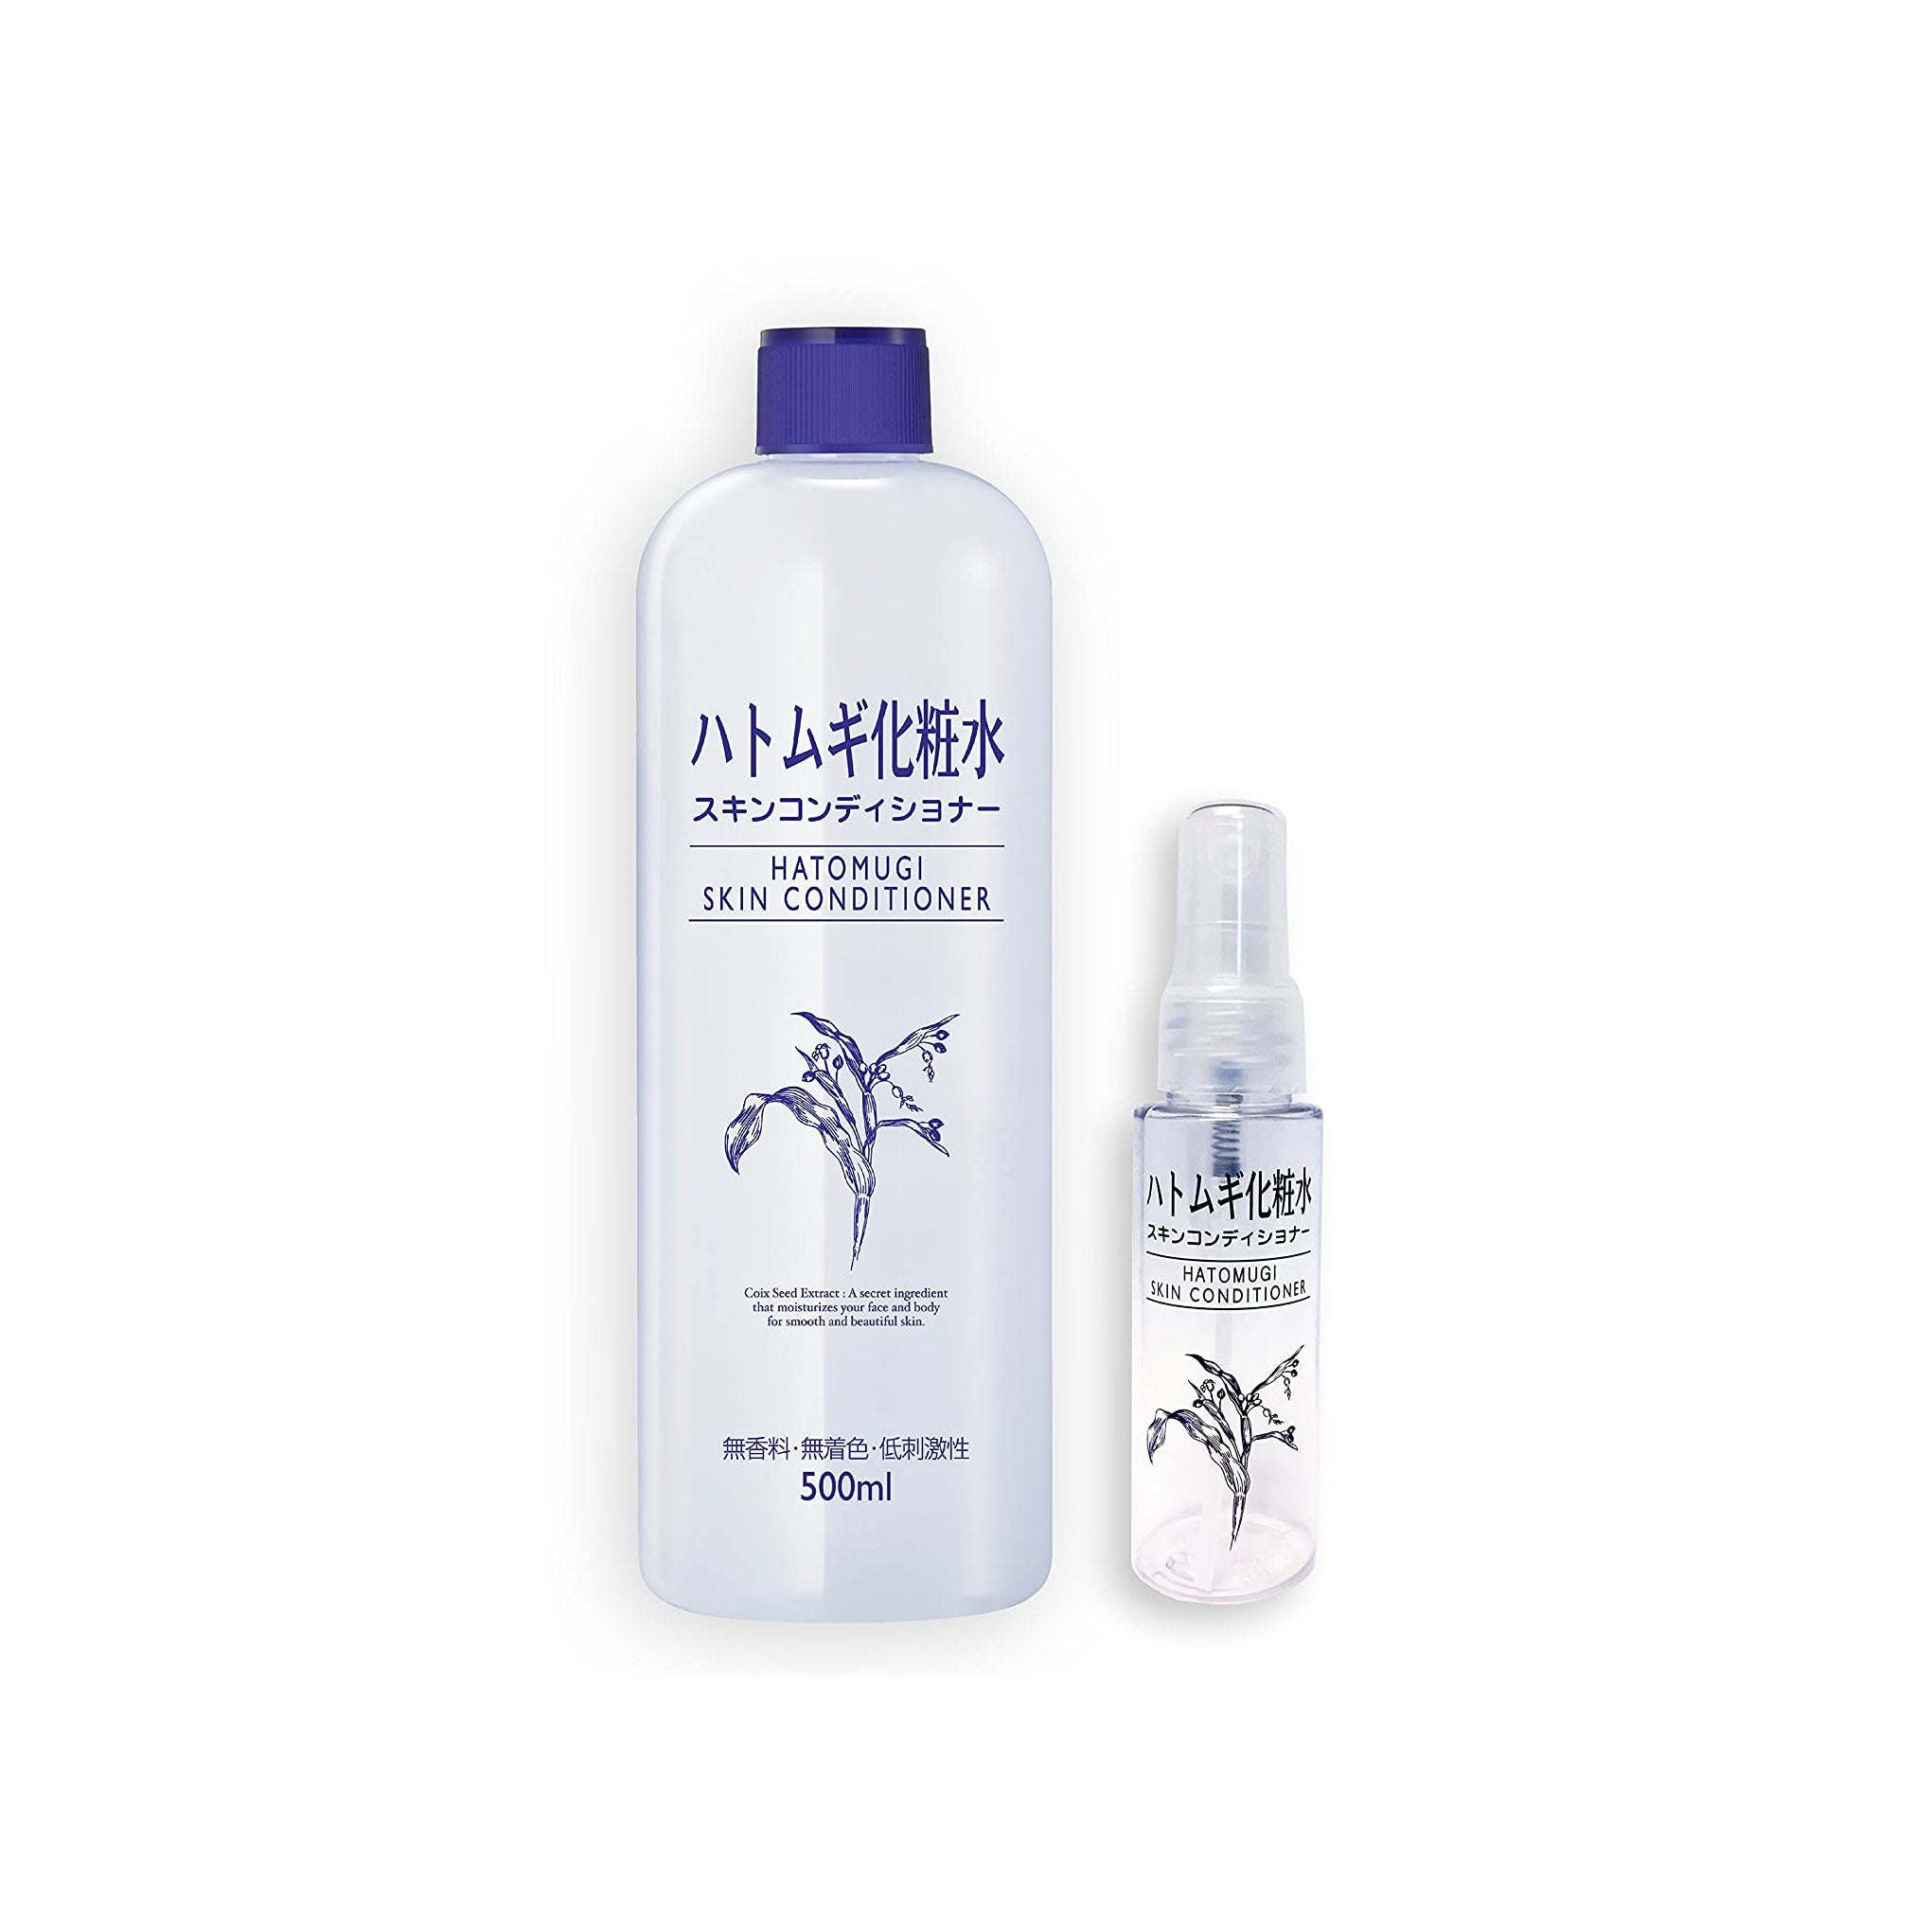 Imju Naturie Hatomugi Facial Lotion with Empty Spray Bottle - Naturie | Kiokii and...